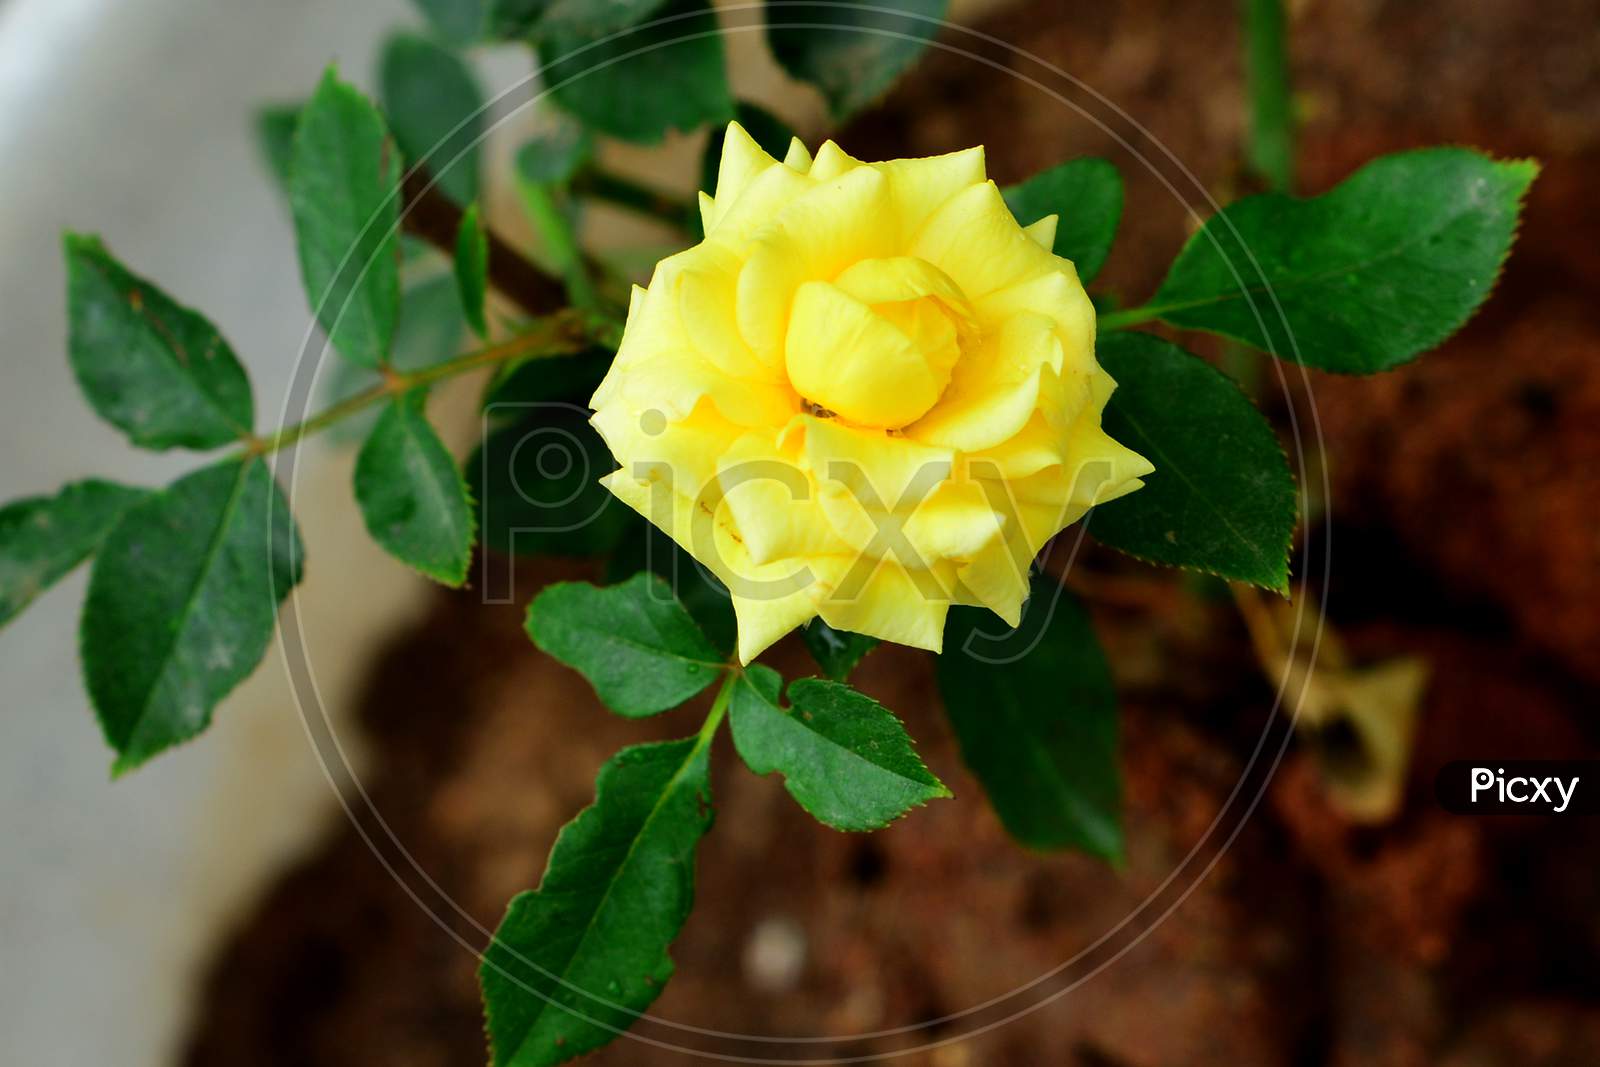 A Single Yellow Rose Bloomed After A Rainy Afternoon.